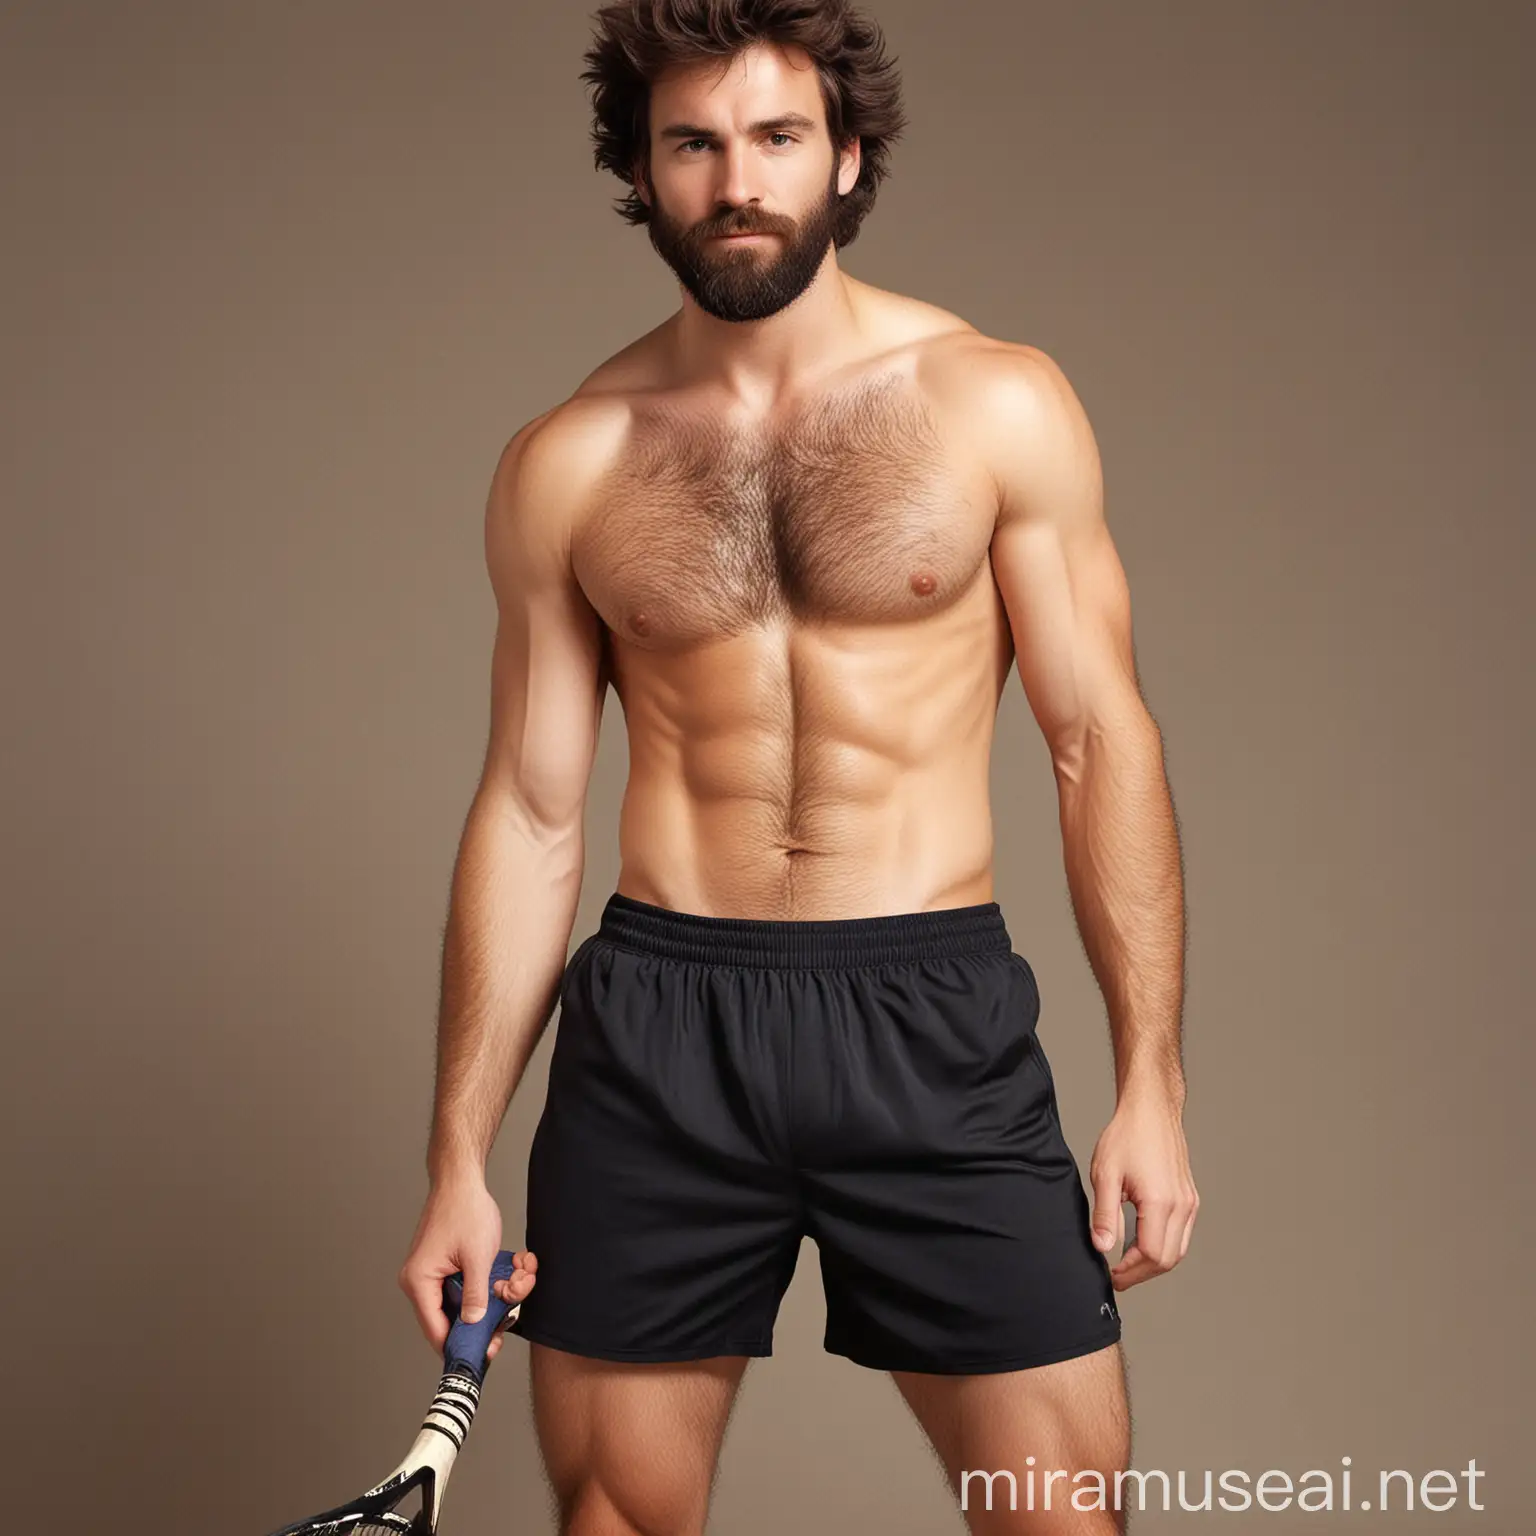 Hairy Guy, playing tennis Shirtless, Wearing 7 inch long black tight shorts, 90's style 90'S STYLE, VERY hairy chest, VERY hairy torso, Scruffy, trimmed facial hair, age 30